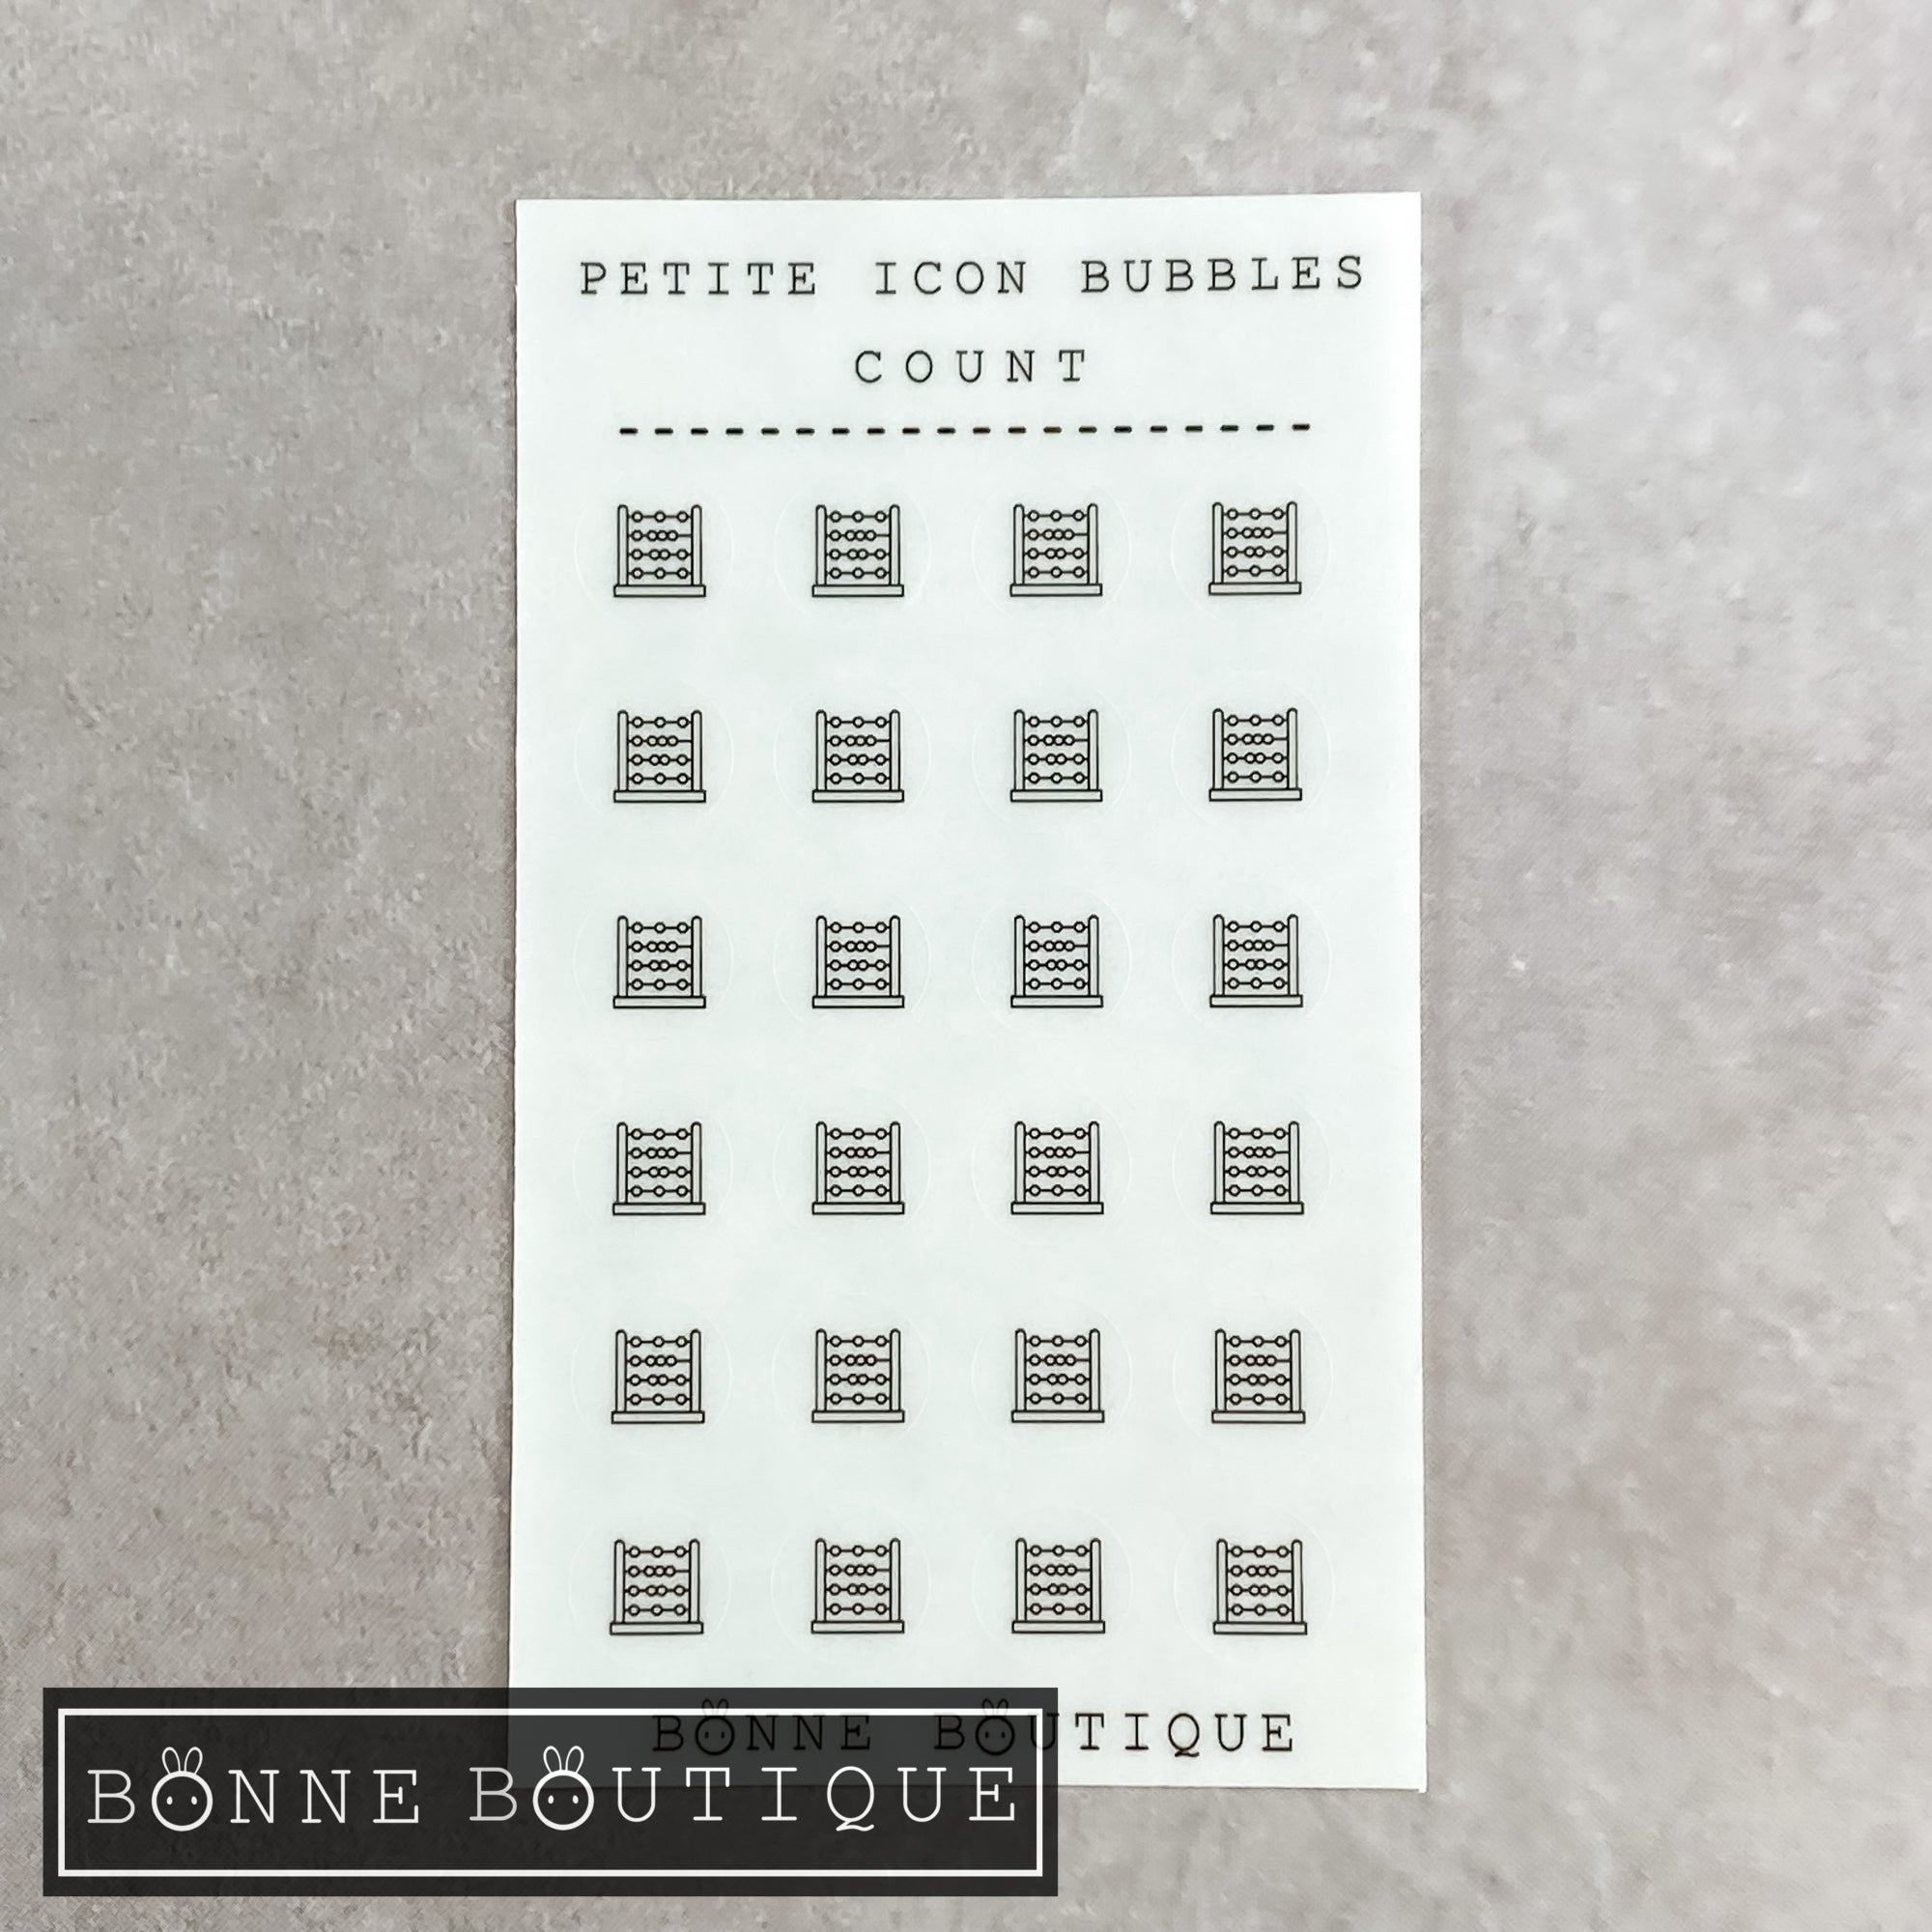 COUNT PETITE ICON BUBBLE - ABACUS